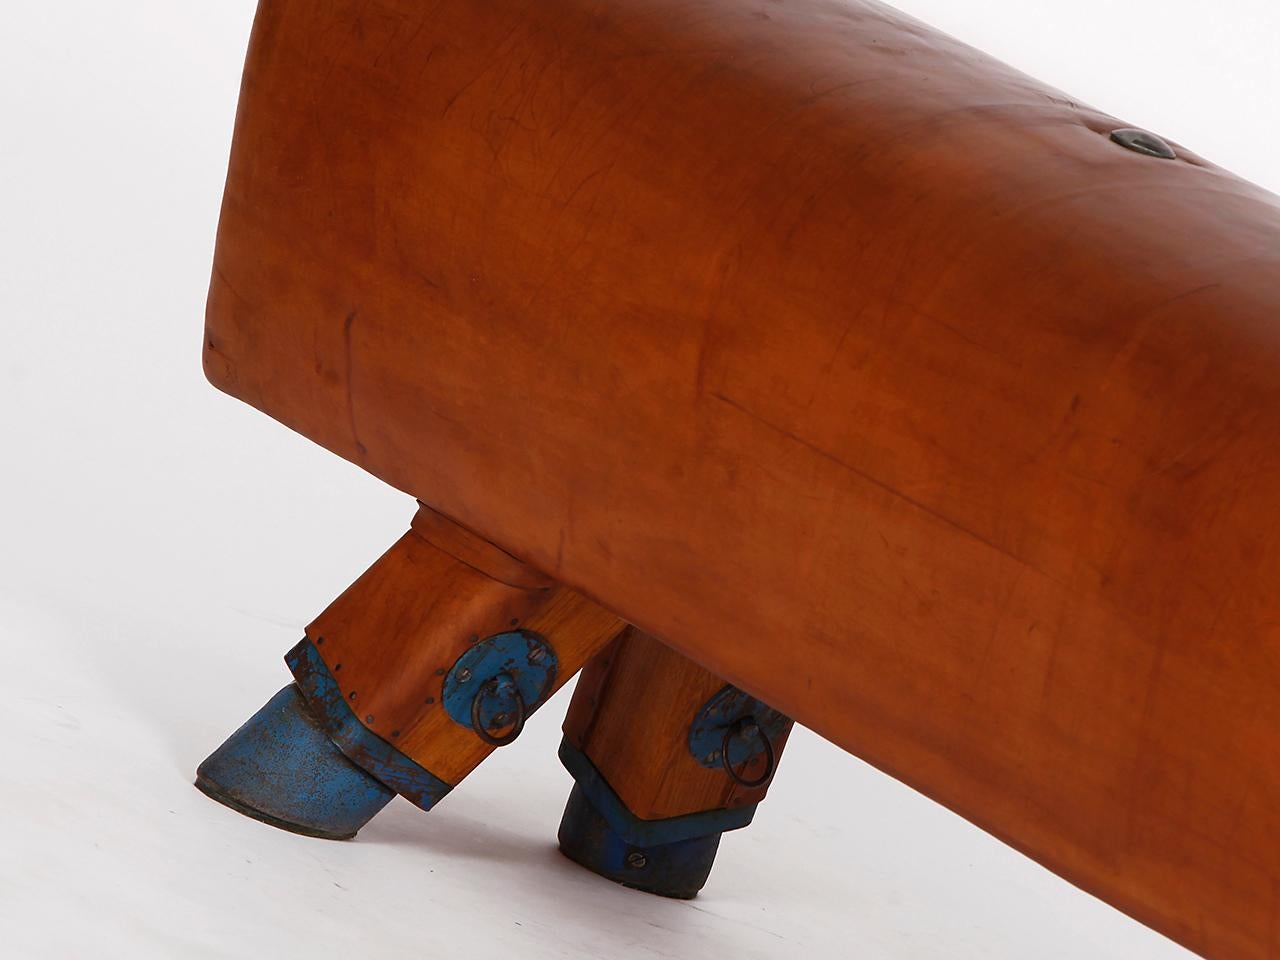 Industrial Gymnastic Leather Pommel Horse Bench, 1930s